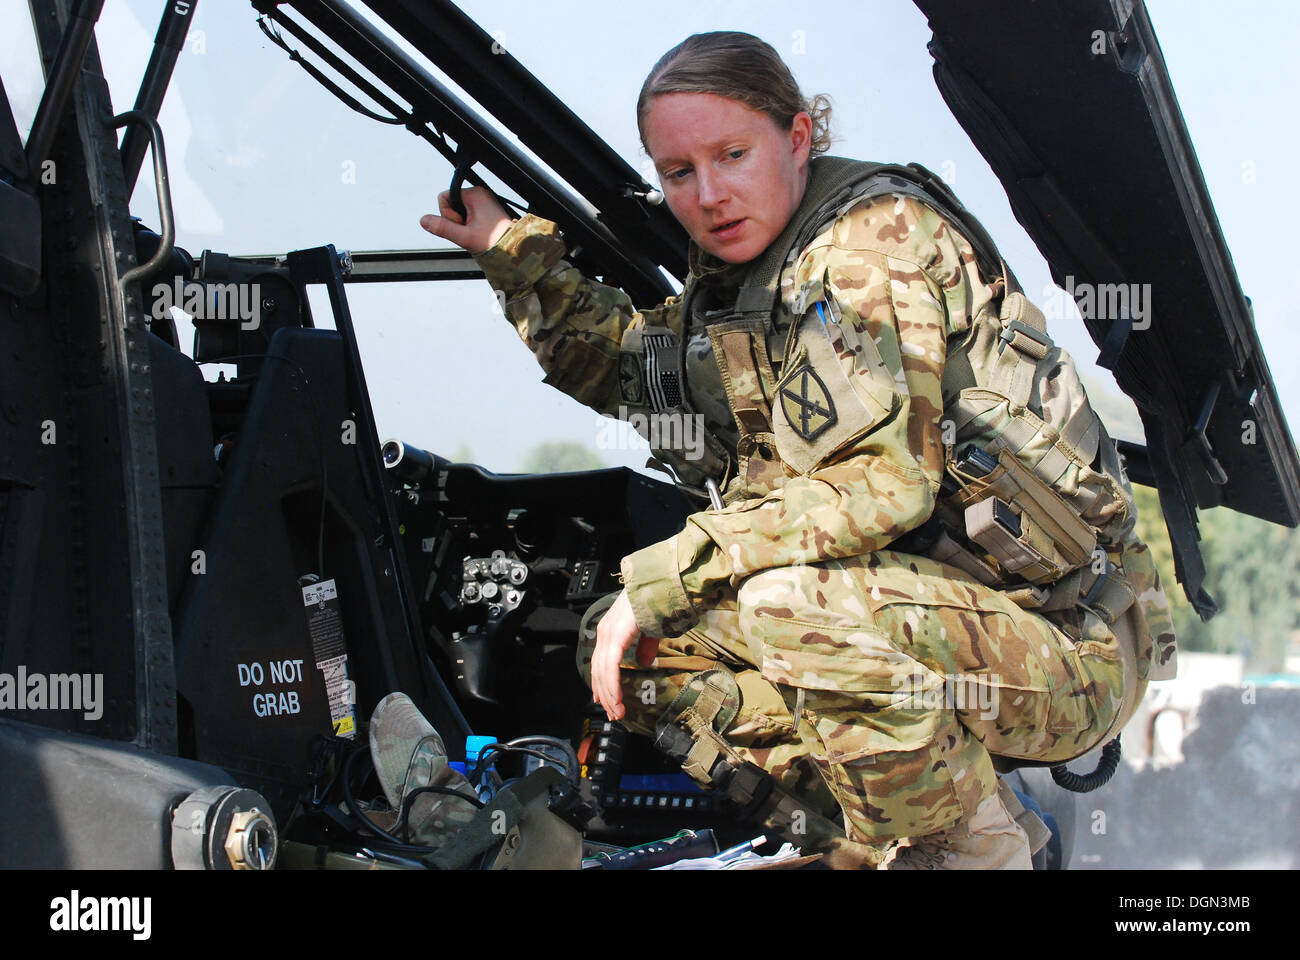 Capt Megan Howell, an AH-64 Apache helicopter pilot from 1st Attack/Reconnaissance Battalion, 10th Combat Aviation Brigade, pauses to catch her breath following a security and reconnaissance mission, Oct. 11, at Forward Operating Base Fenty, Afghanistan. Stock Photo